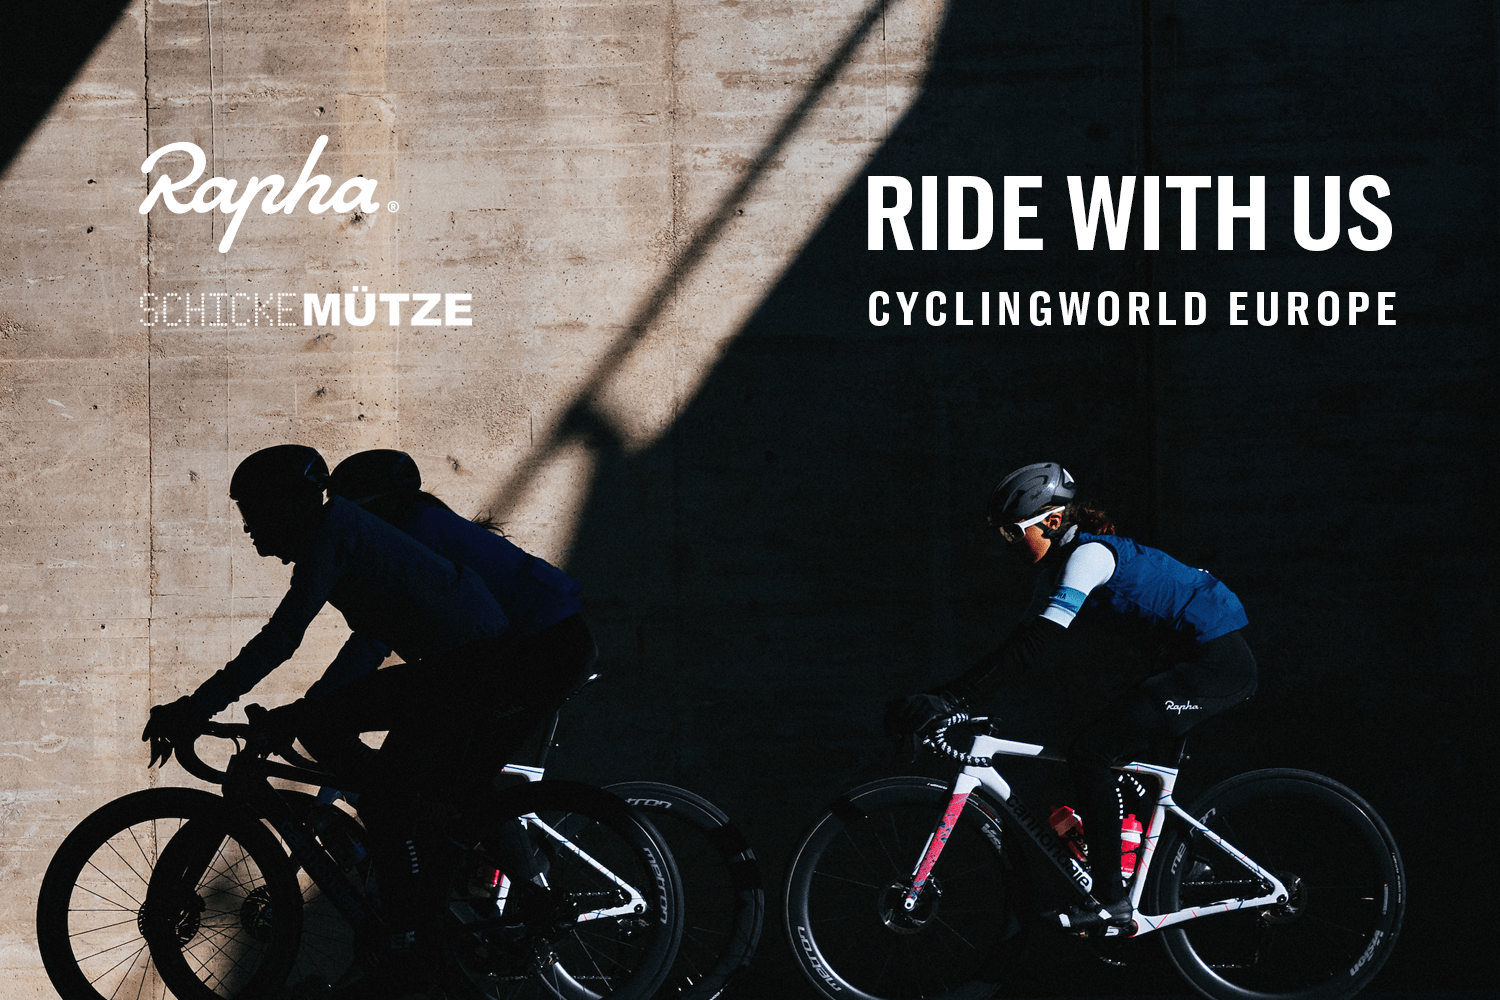 Rapha X Schicke Mütze Road Ride - Ride with Us cover image